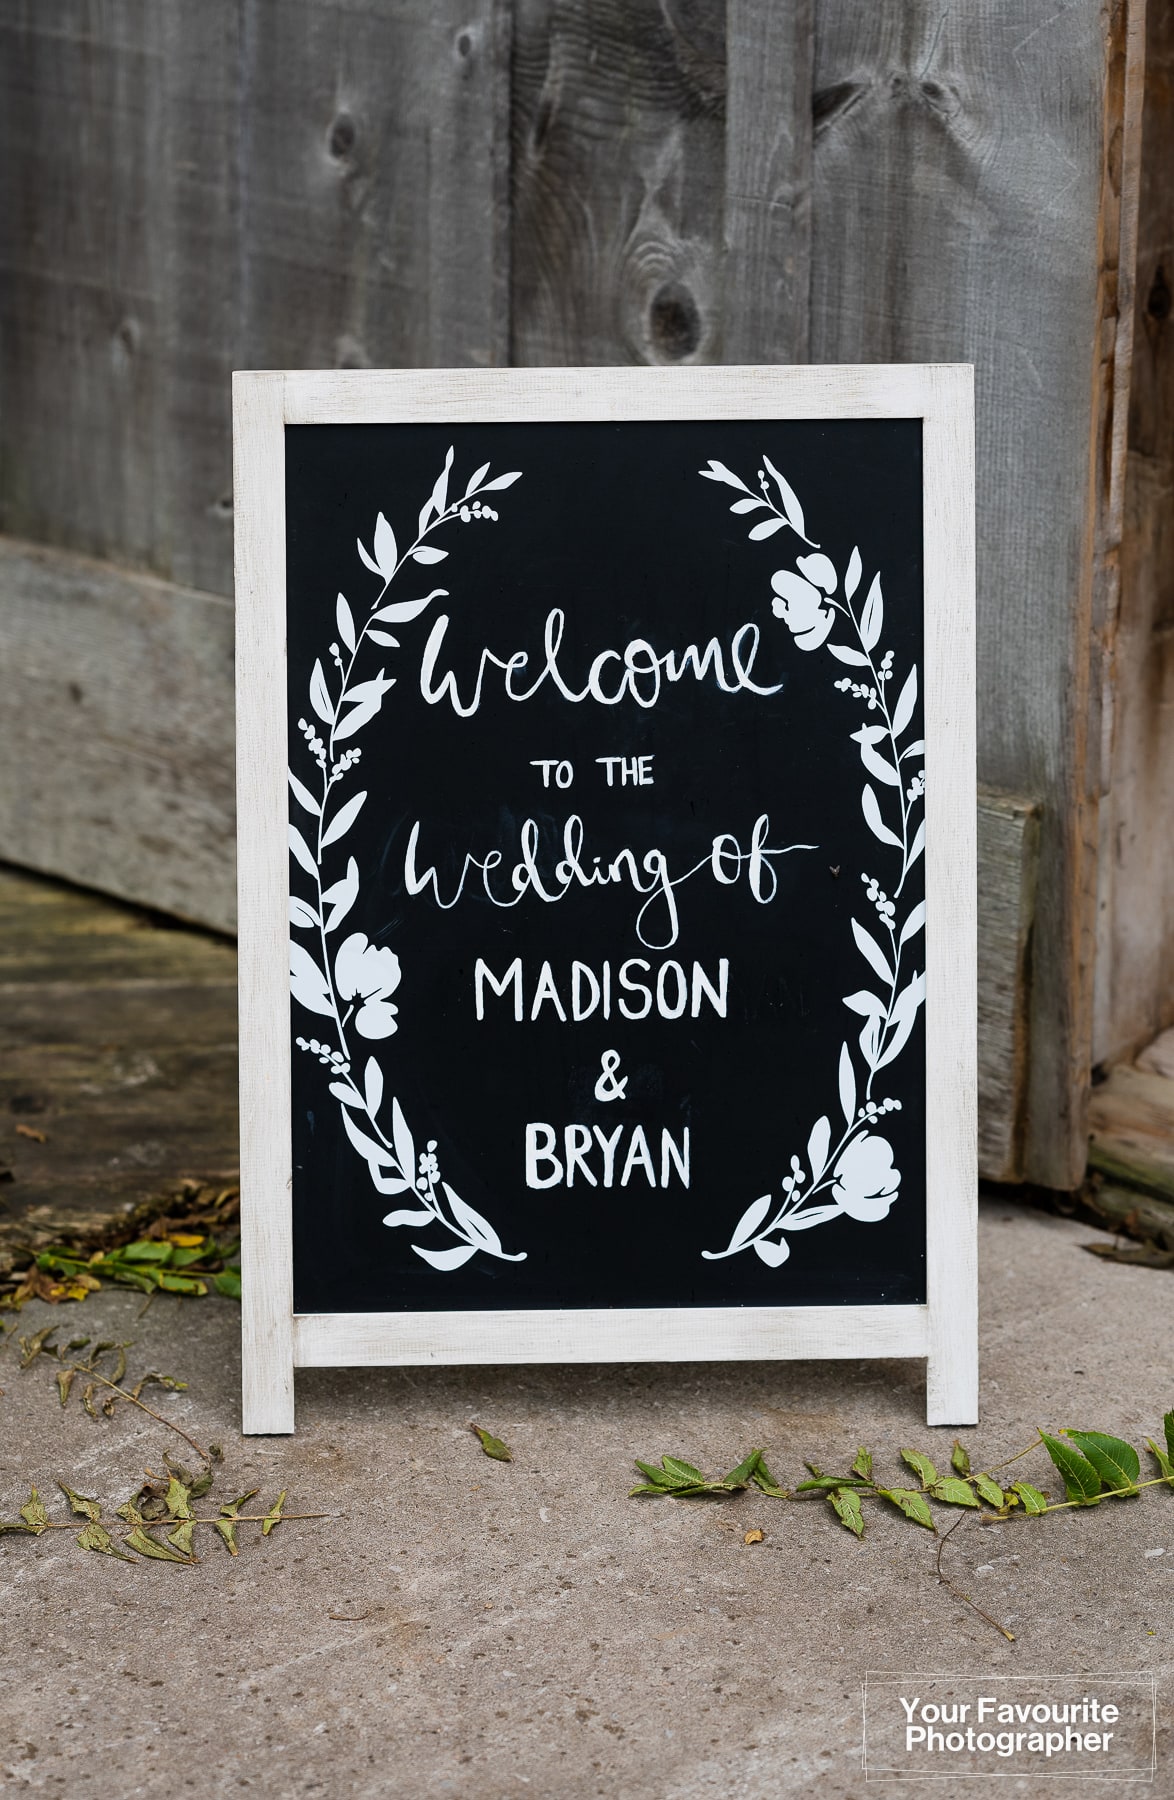 Welcome to the wedding of Madison and Bryan